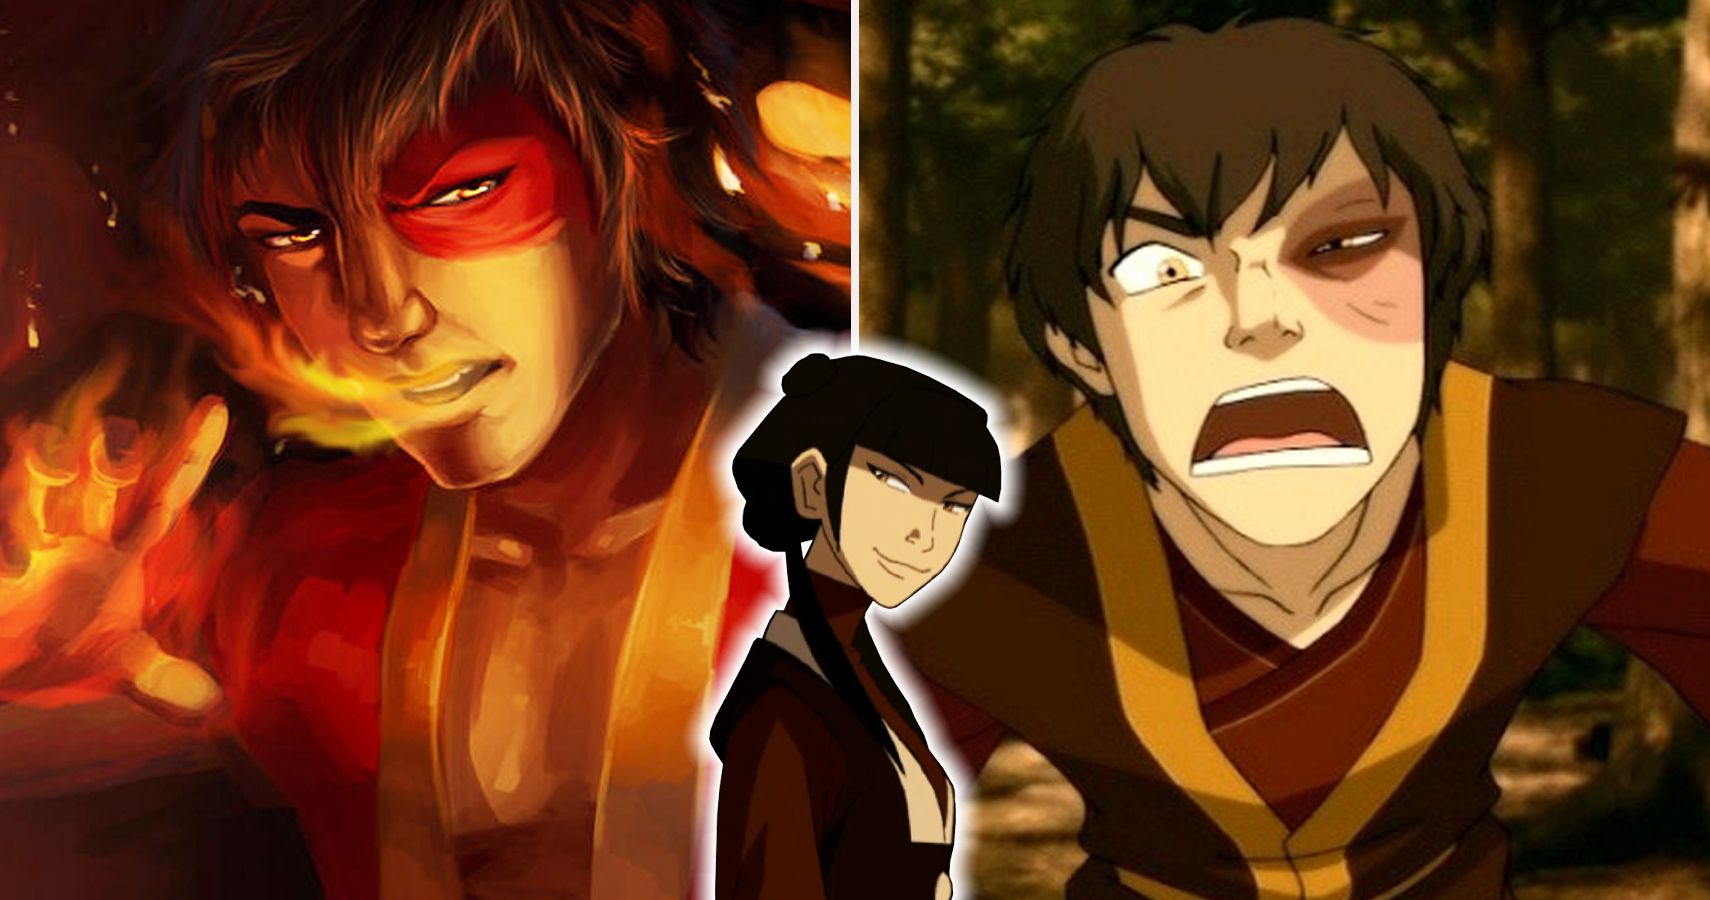 With support from his uncle, iroh, and after much internal struggle and tur...